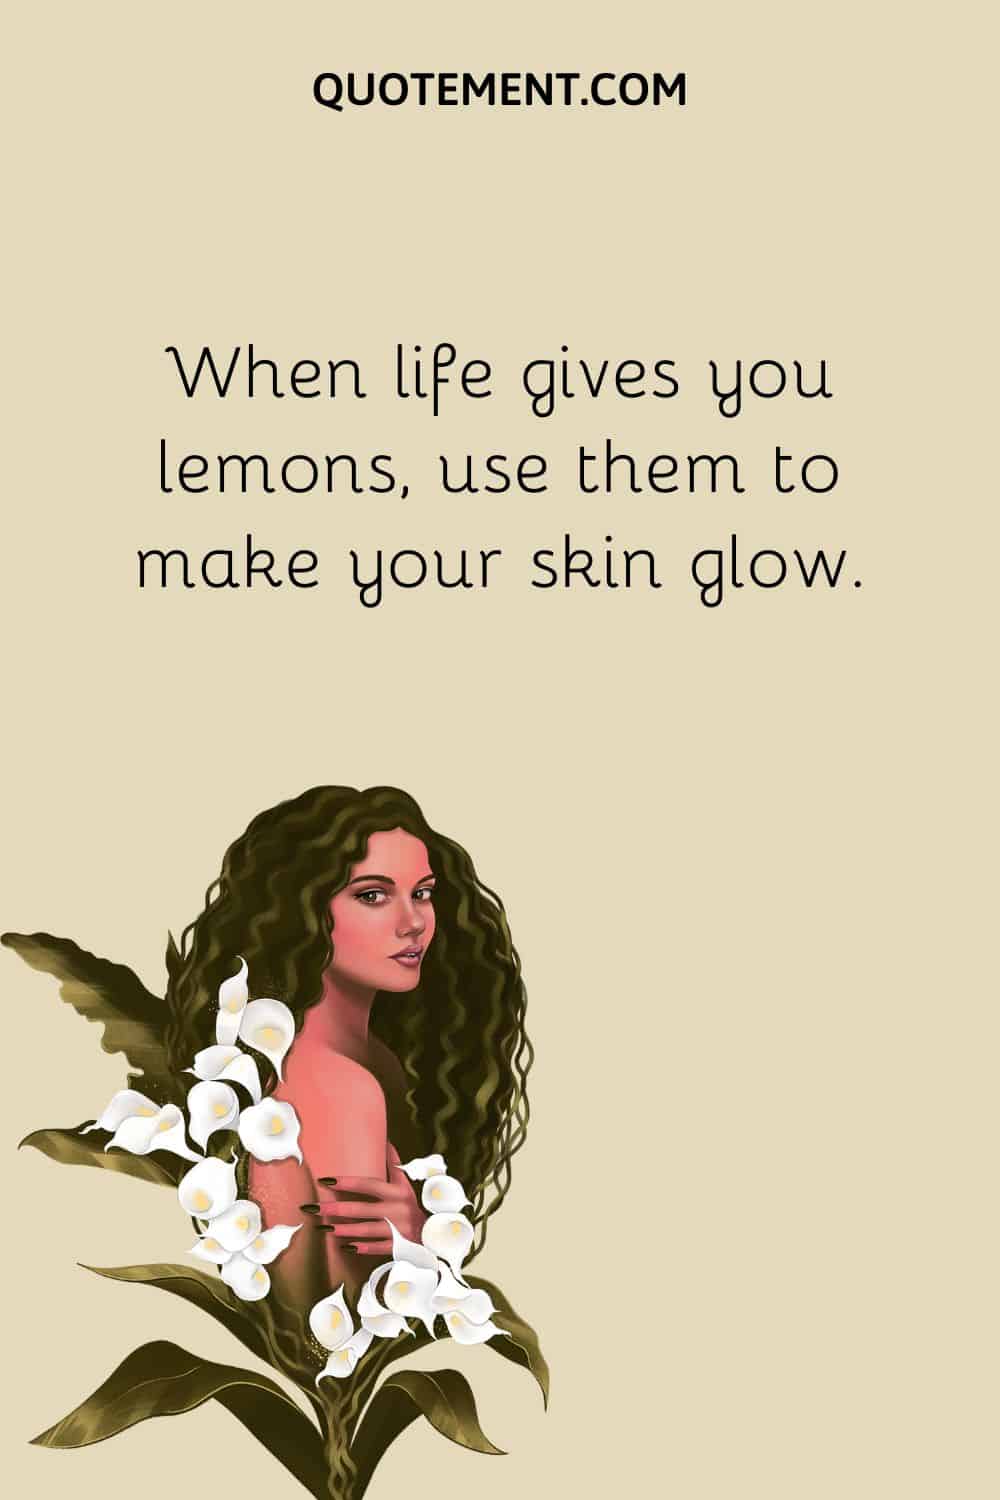 When life gives you lemons, use them to make your skin glow